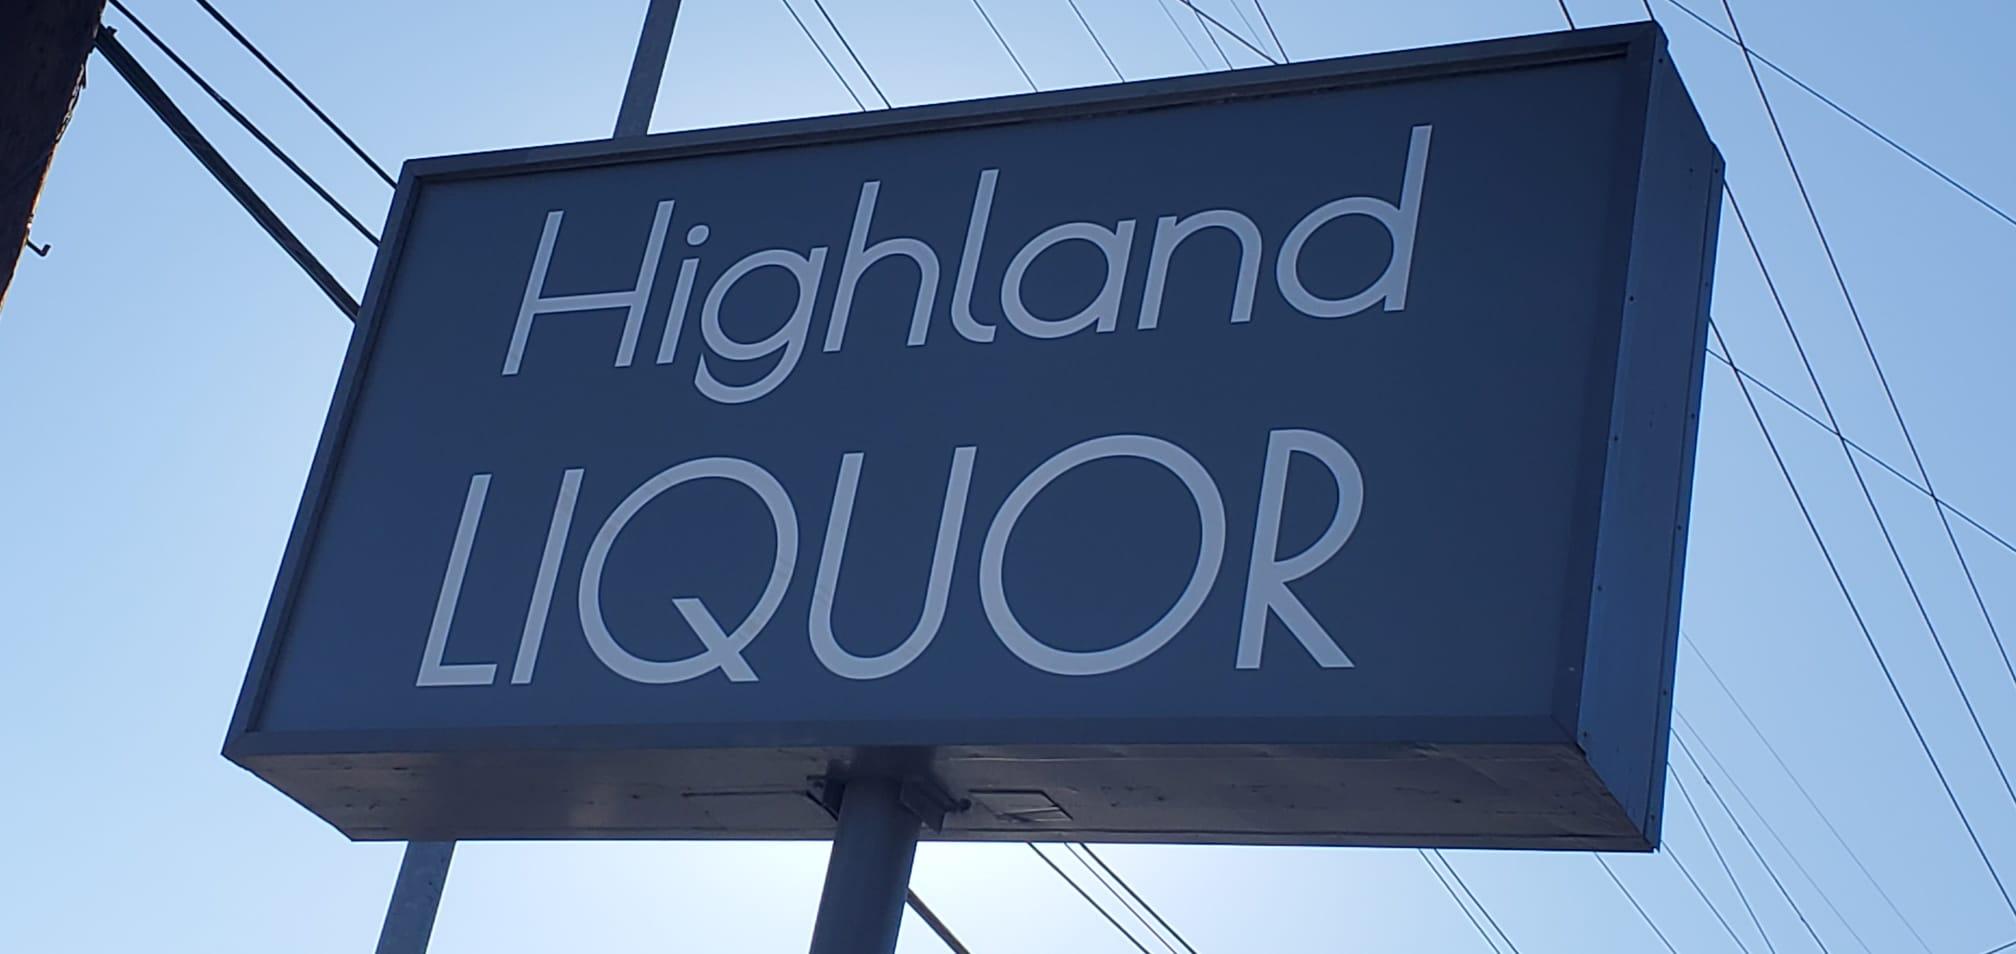 You are currently viewing Pylon Sign for Highland Liquor in Granada Hills